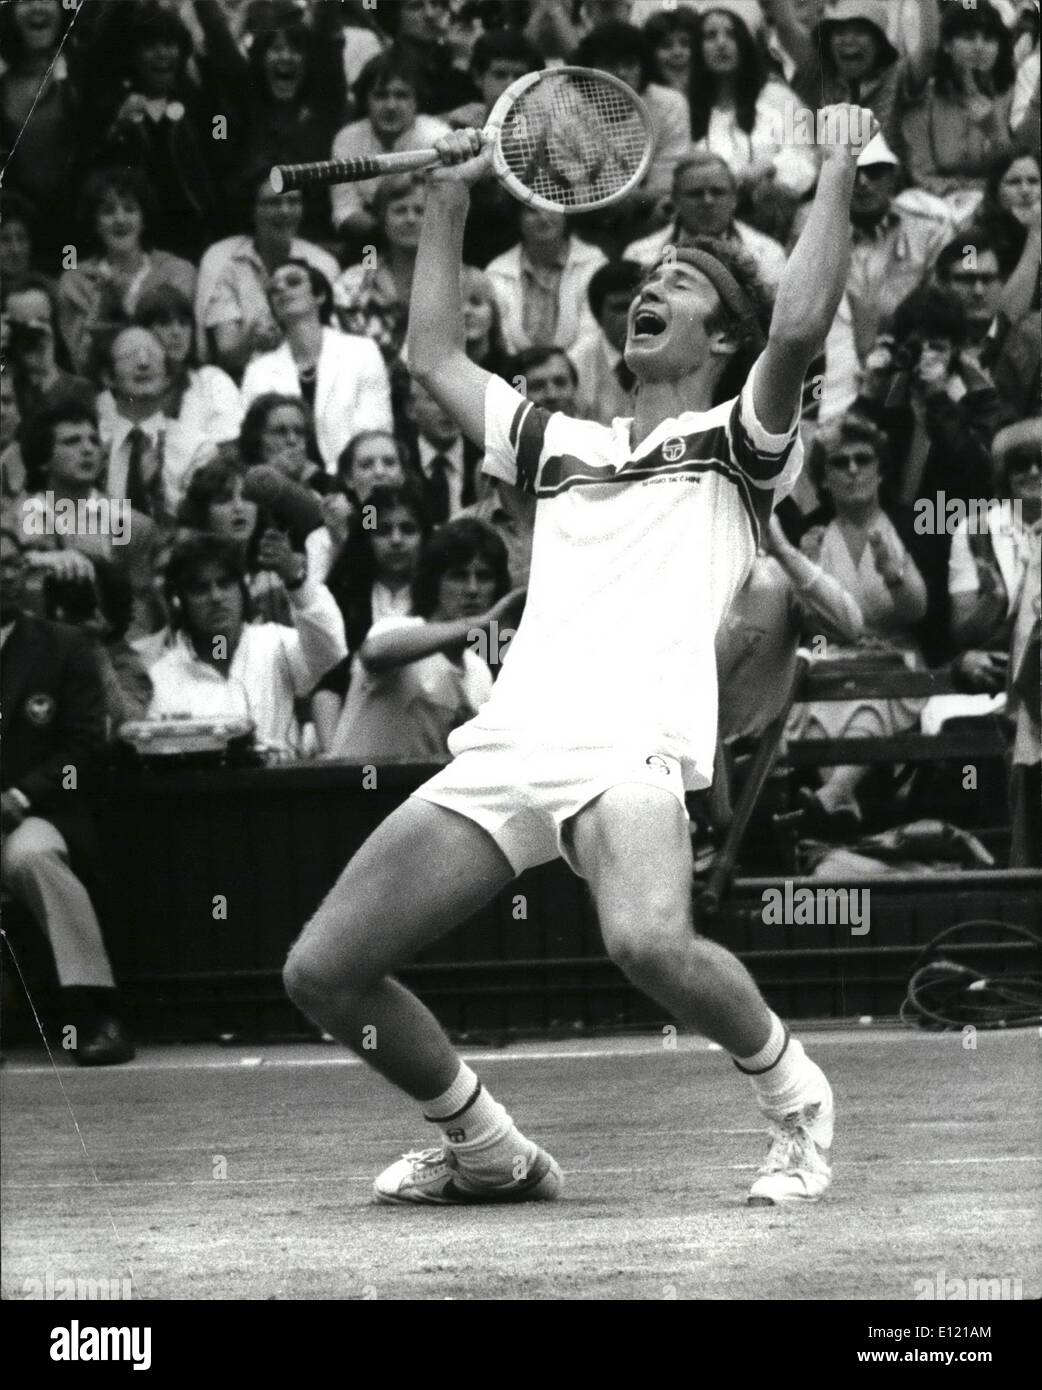 Jul. 05, 1981 - July 5th 1981 McEnroe wins the Wimbledon Title. American John McEnroe became the Wimbledon champion on Saturday when he beat the holder of the title for the last five years, Bjorn Borg. 6-4, 6-7, 6-7, 4-6. Photo Shows: John McEnroe at the moment of victory after winning the men's singles title on the centre court at Wimbledon. Stock Photo